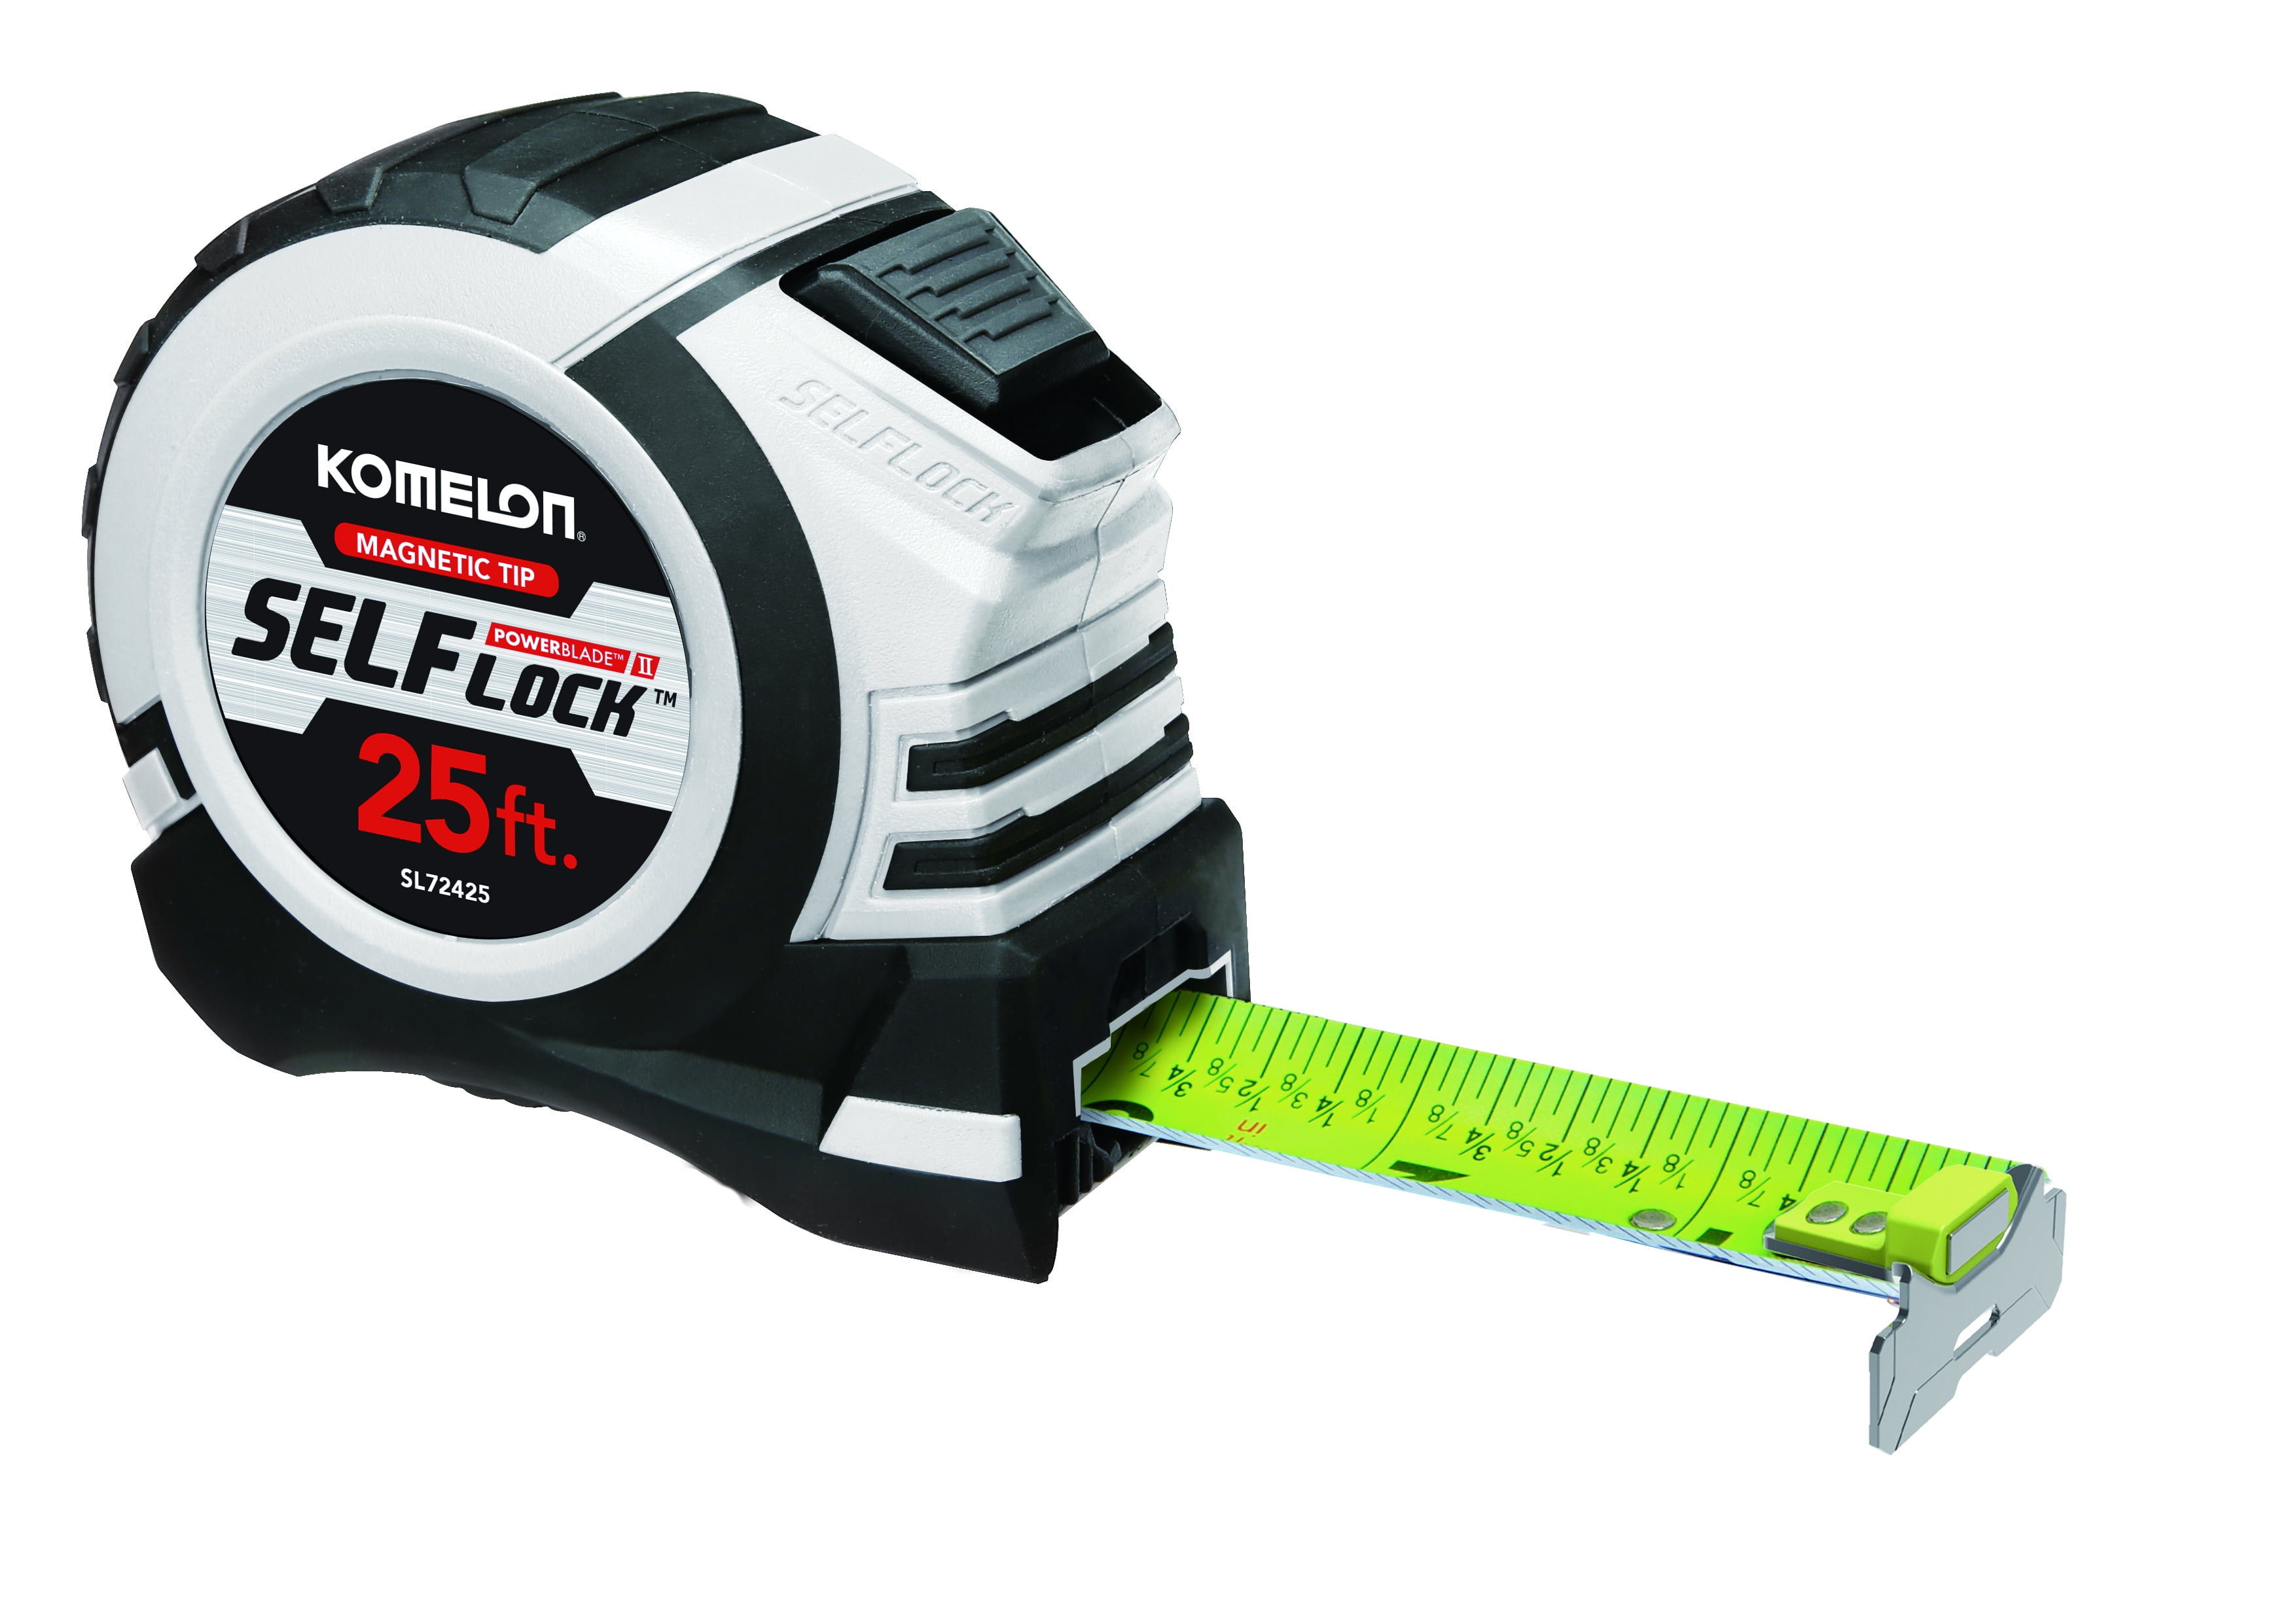 Komelon 25 ft. Contractor TS Tape Measure, 93425T at Tractor